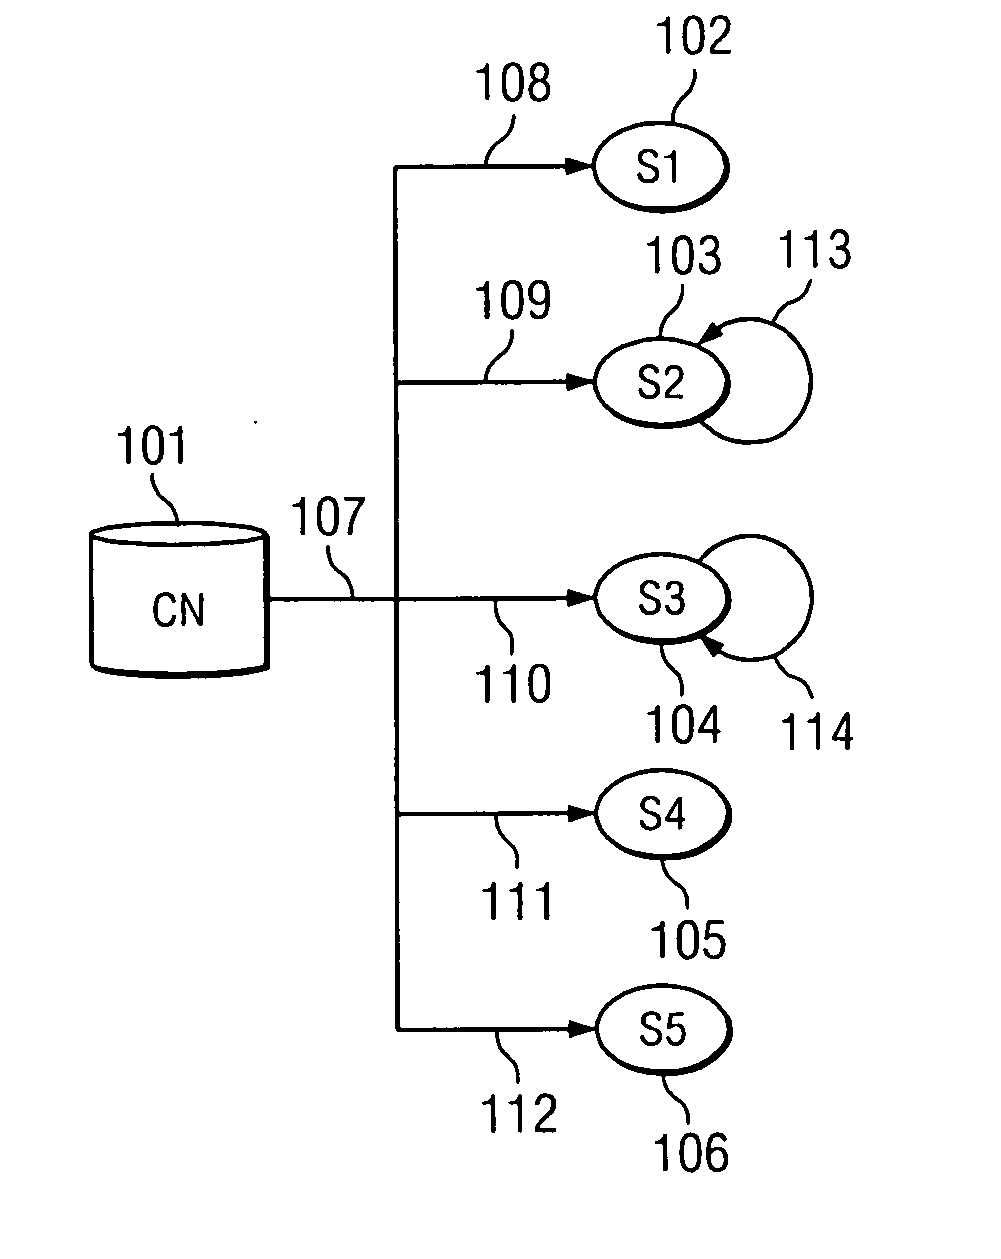 Method for adaptively modifying the observed collective behavior of individual sensor nodes based on broadcasting of parameters